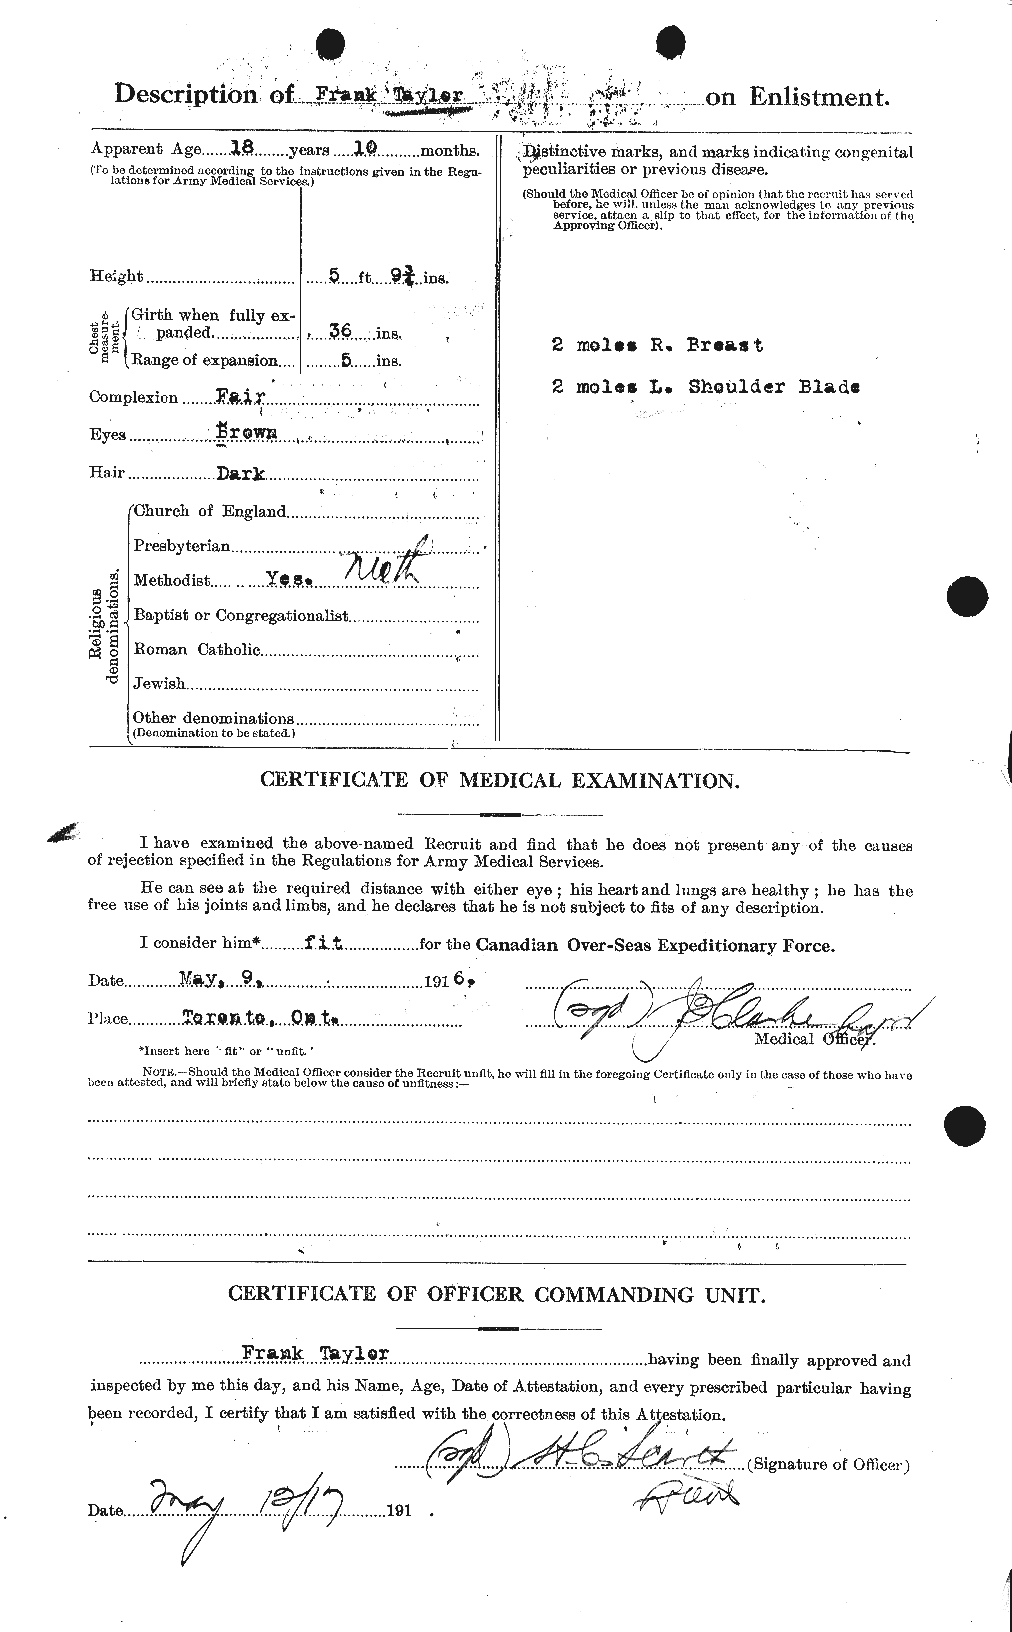 Personnel Records of the First World War - CEF 625713b